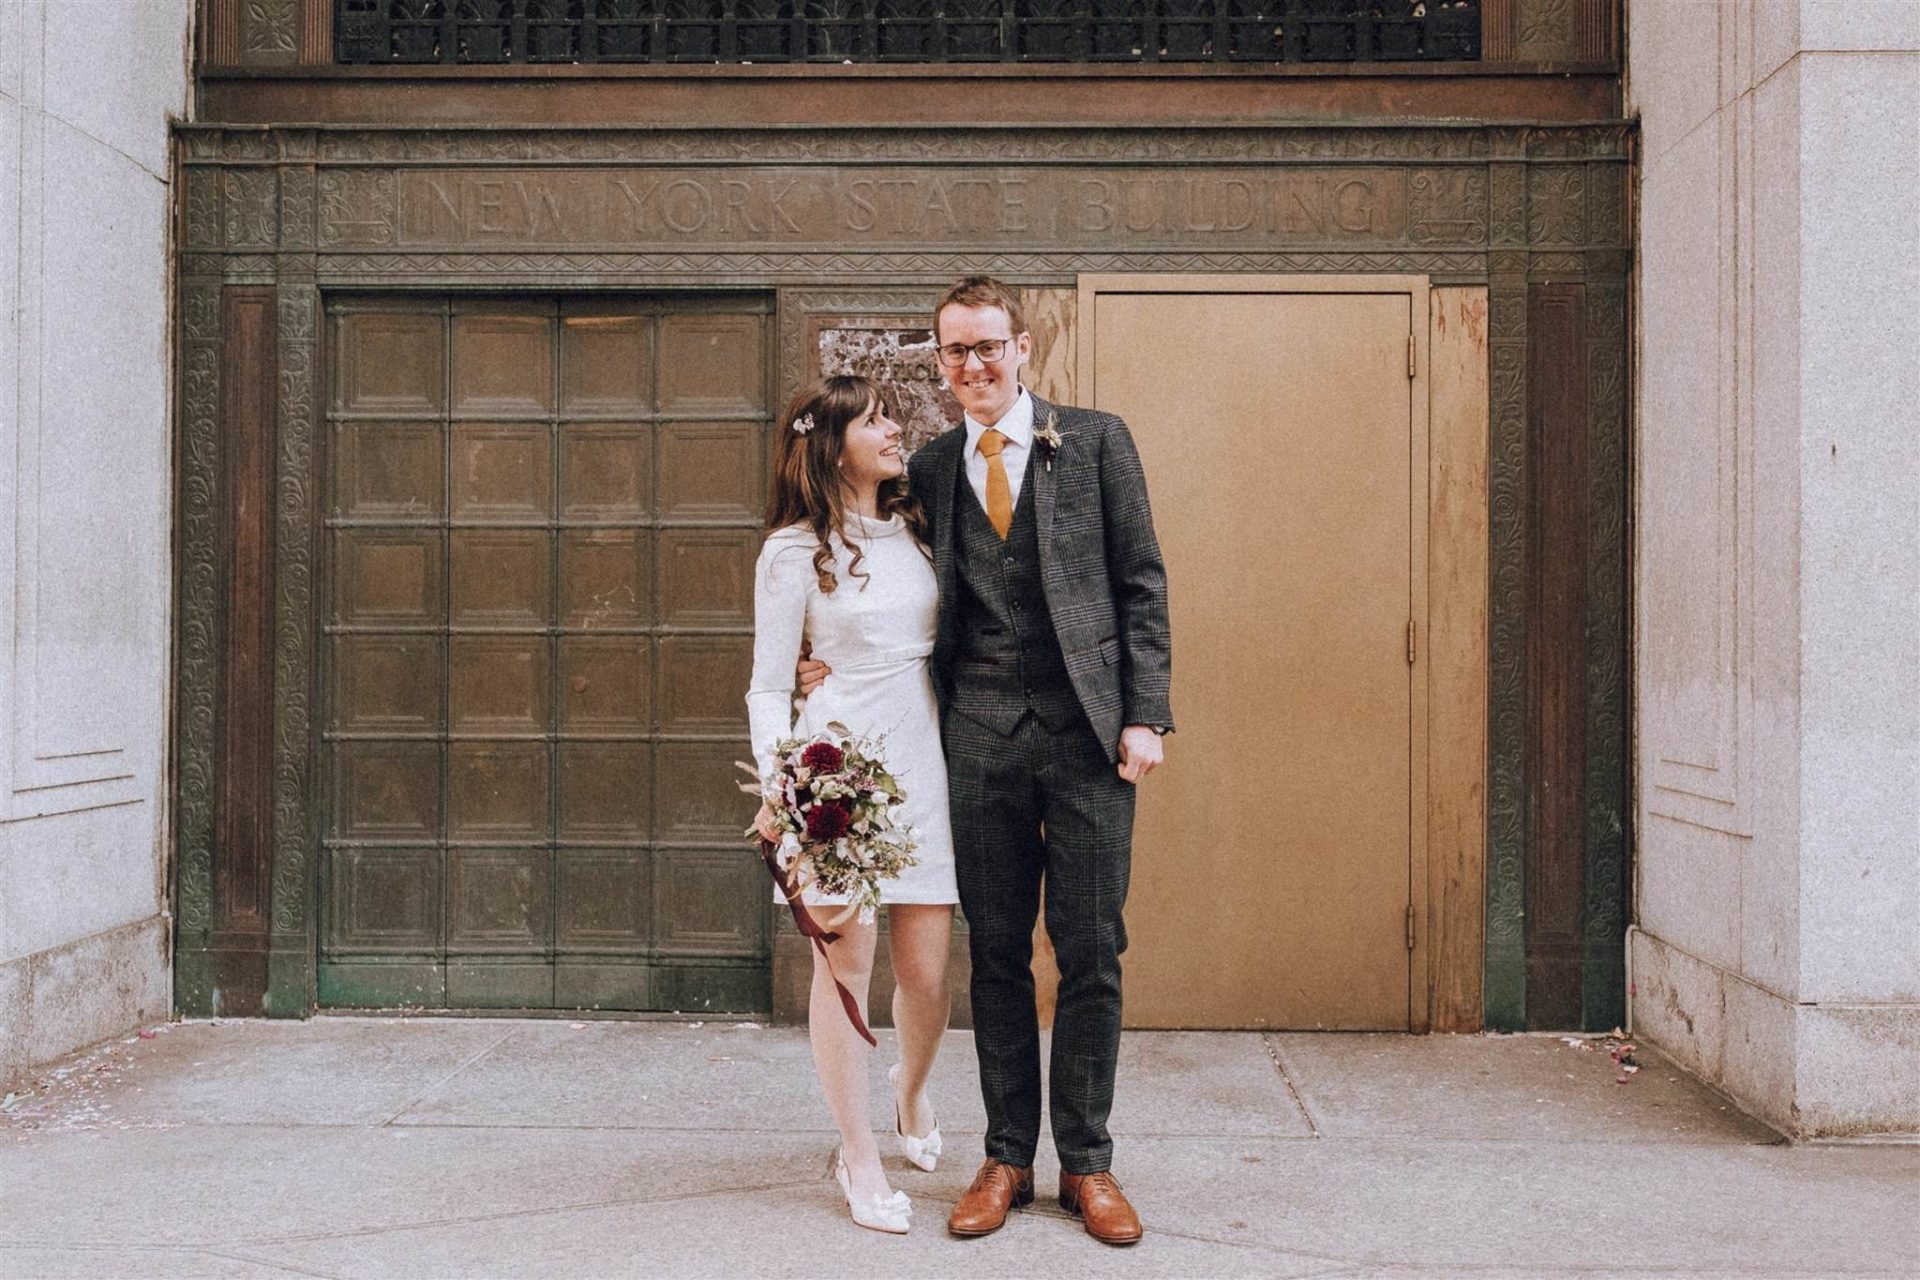 young couple after getting married at nyc city hall